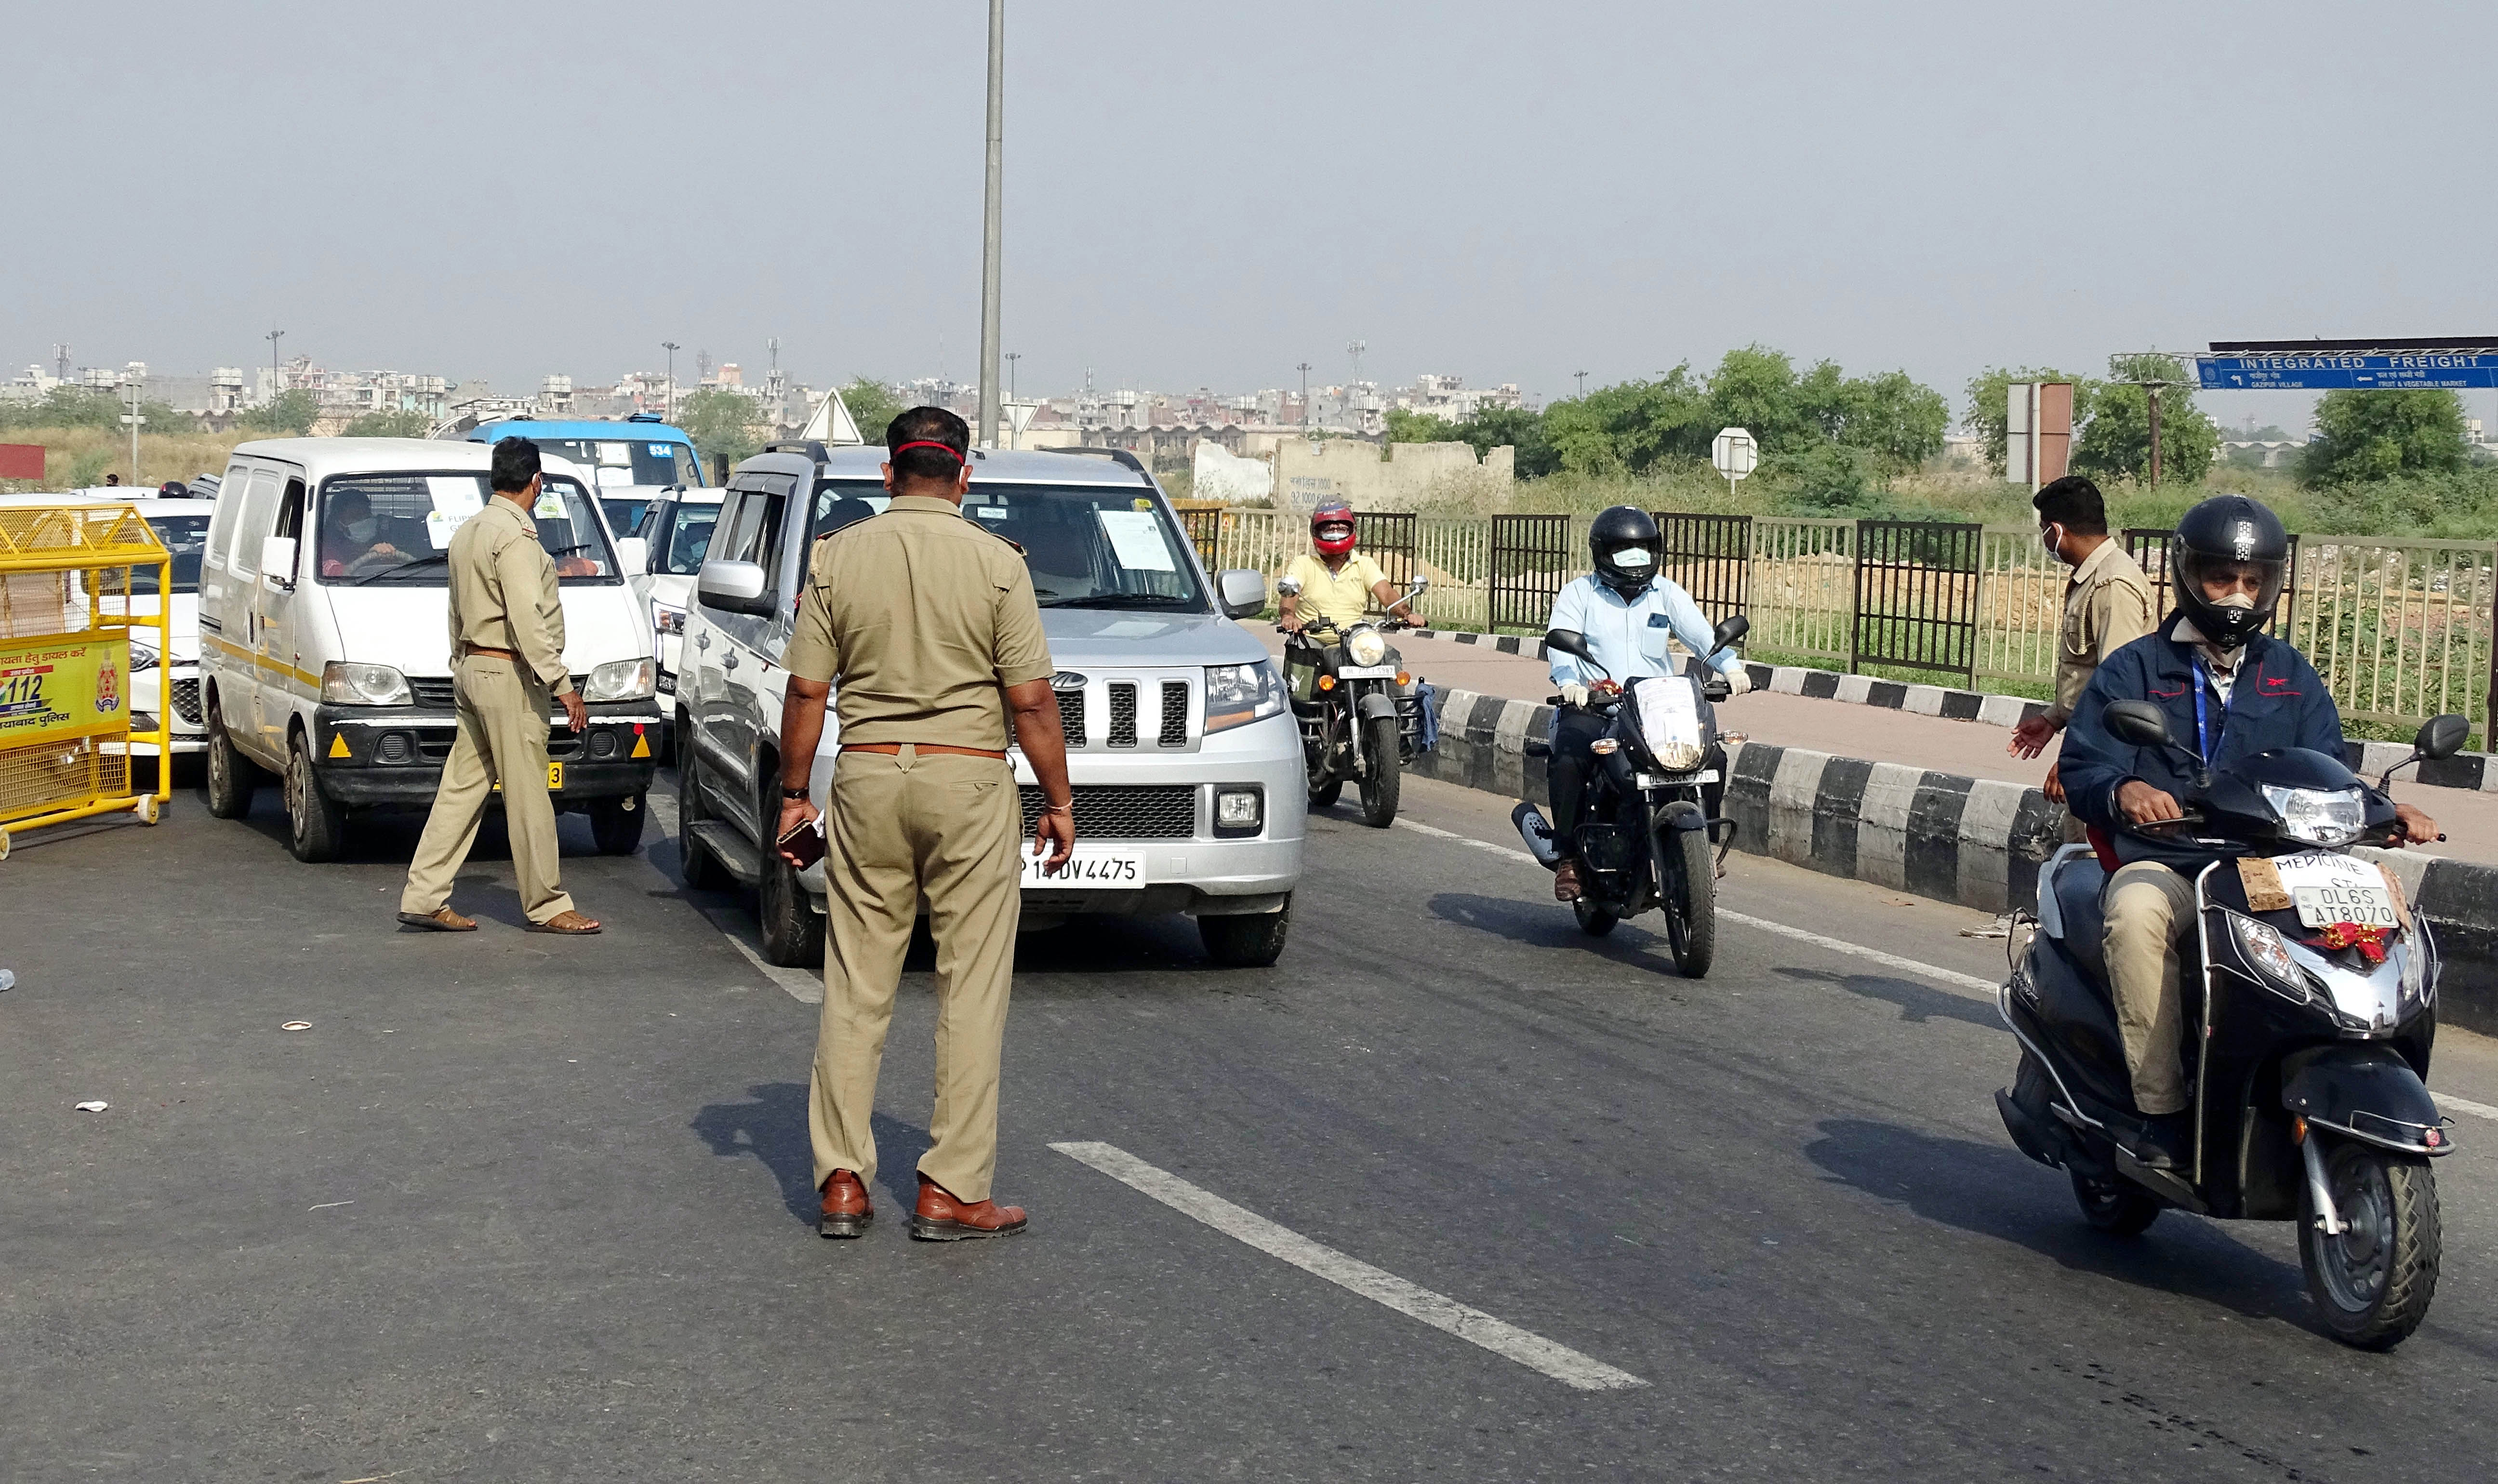 Police personnel check IDs and passes of commuters | See Pics